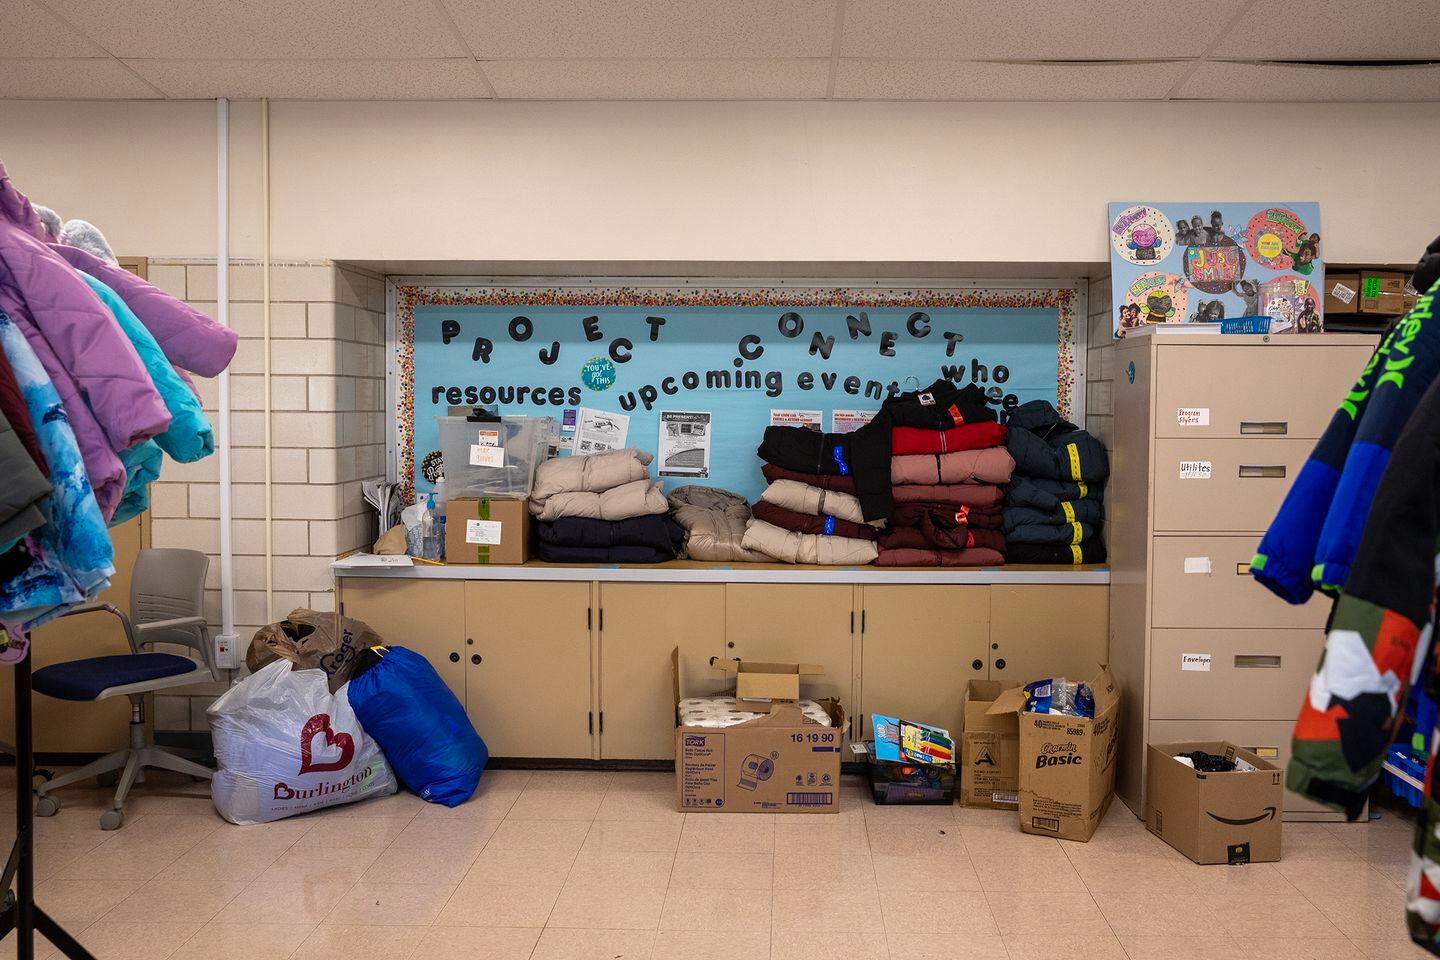 Project Connect provides jackets, shoes, uniforms, backpacks, and more for Cincinnati students in need.